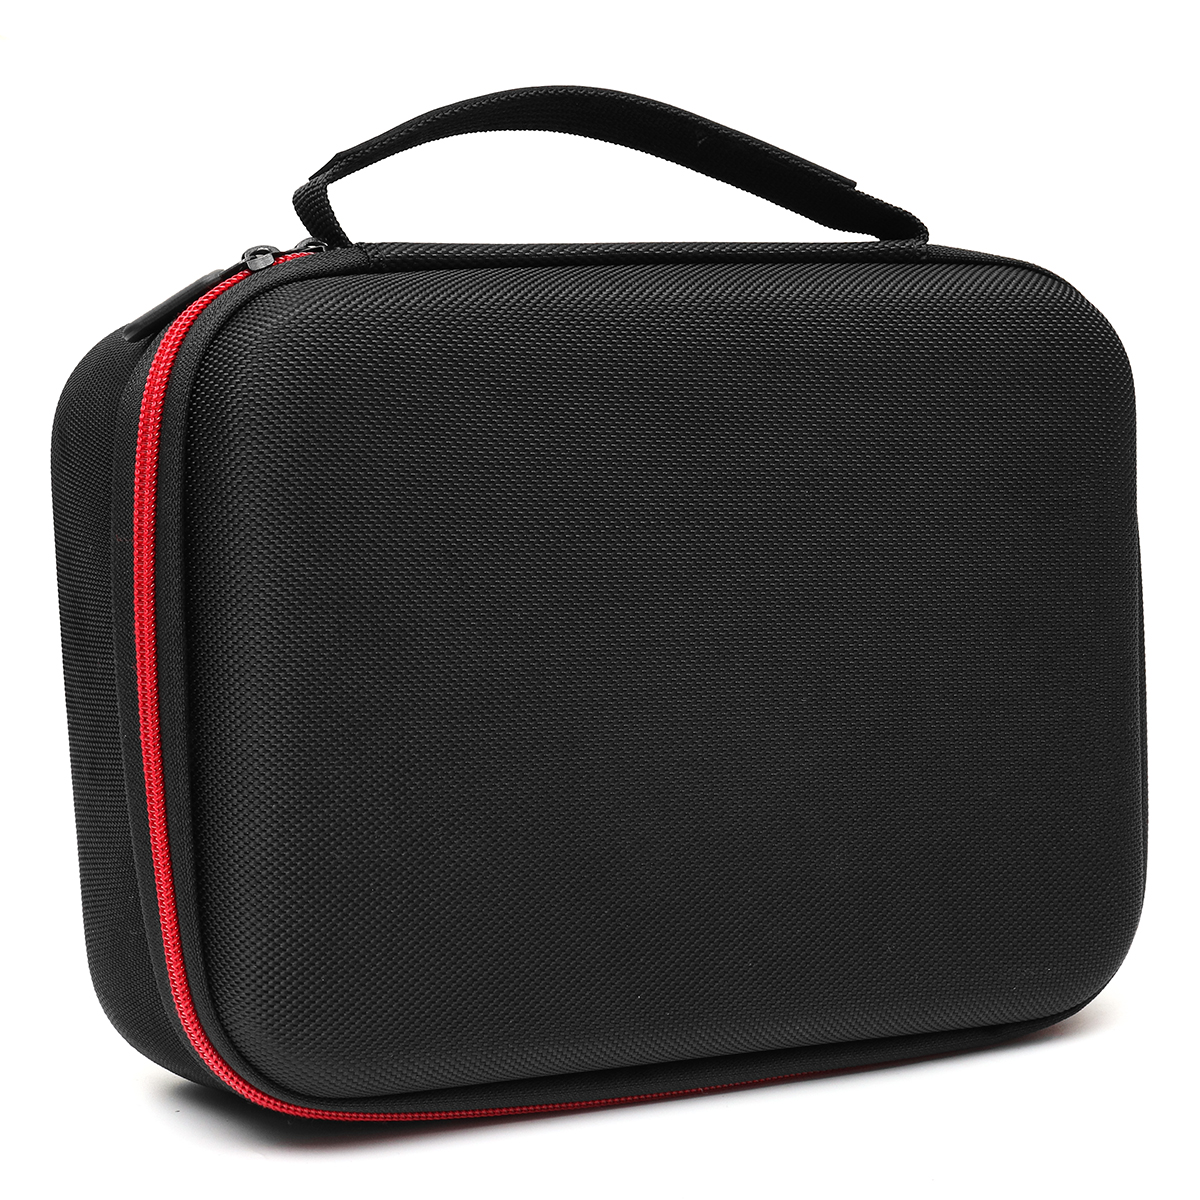 Portable Travel Storage Box Carry Case Bag For Nintendo Switch MINI SFC Game Console 15